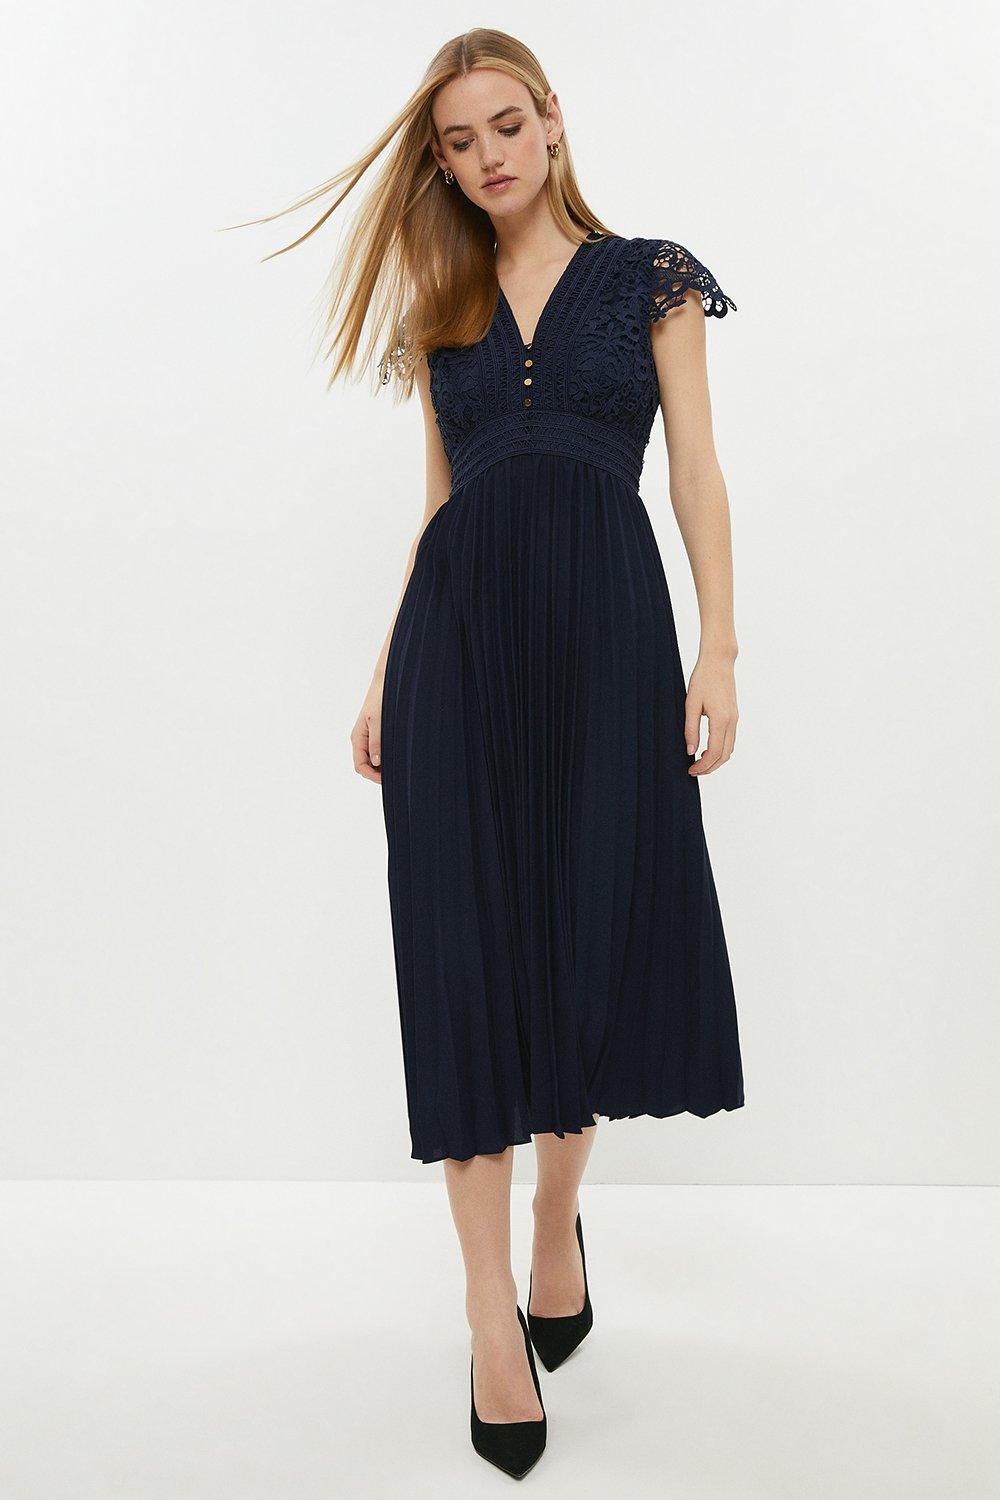 Cap Sleeve Pleat Skirt Two In One Dress - Navy